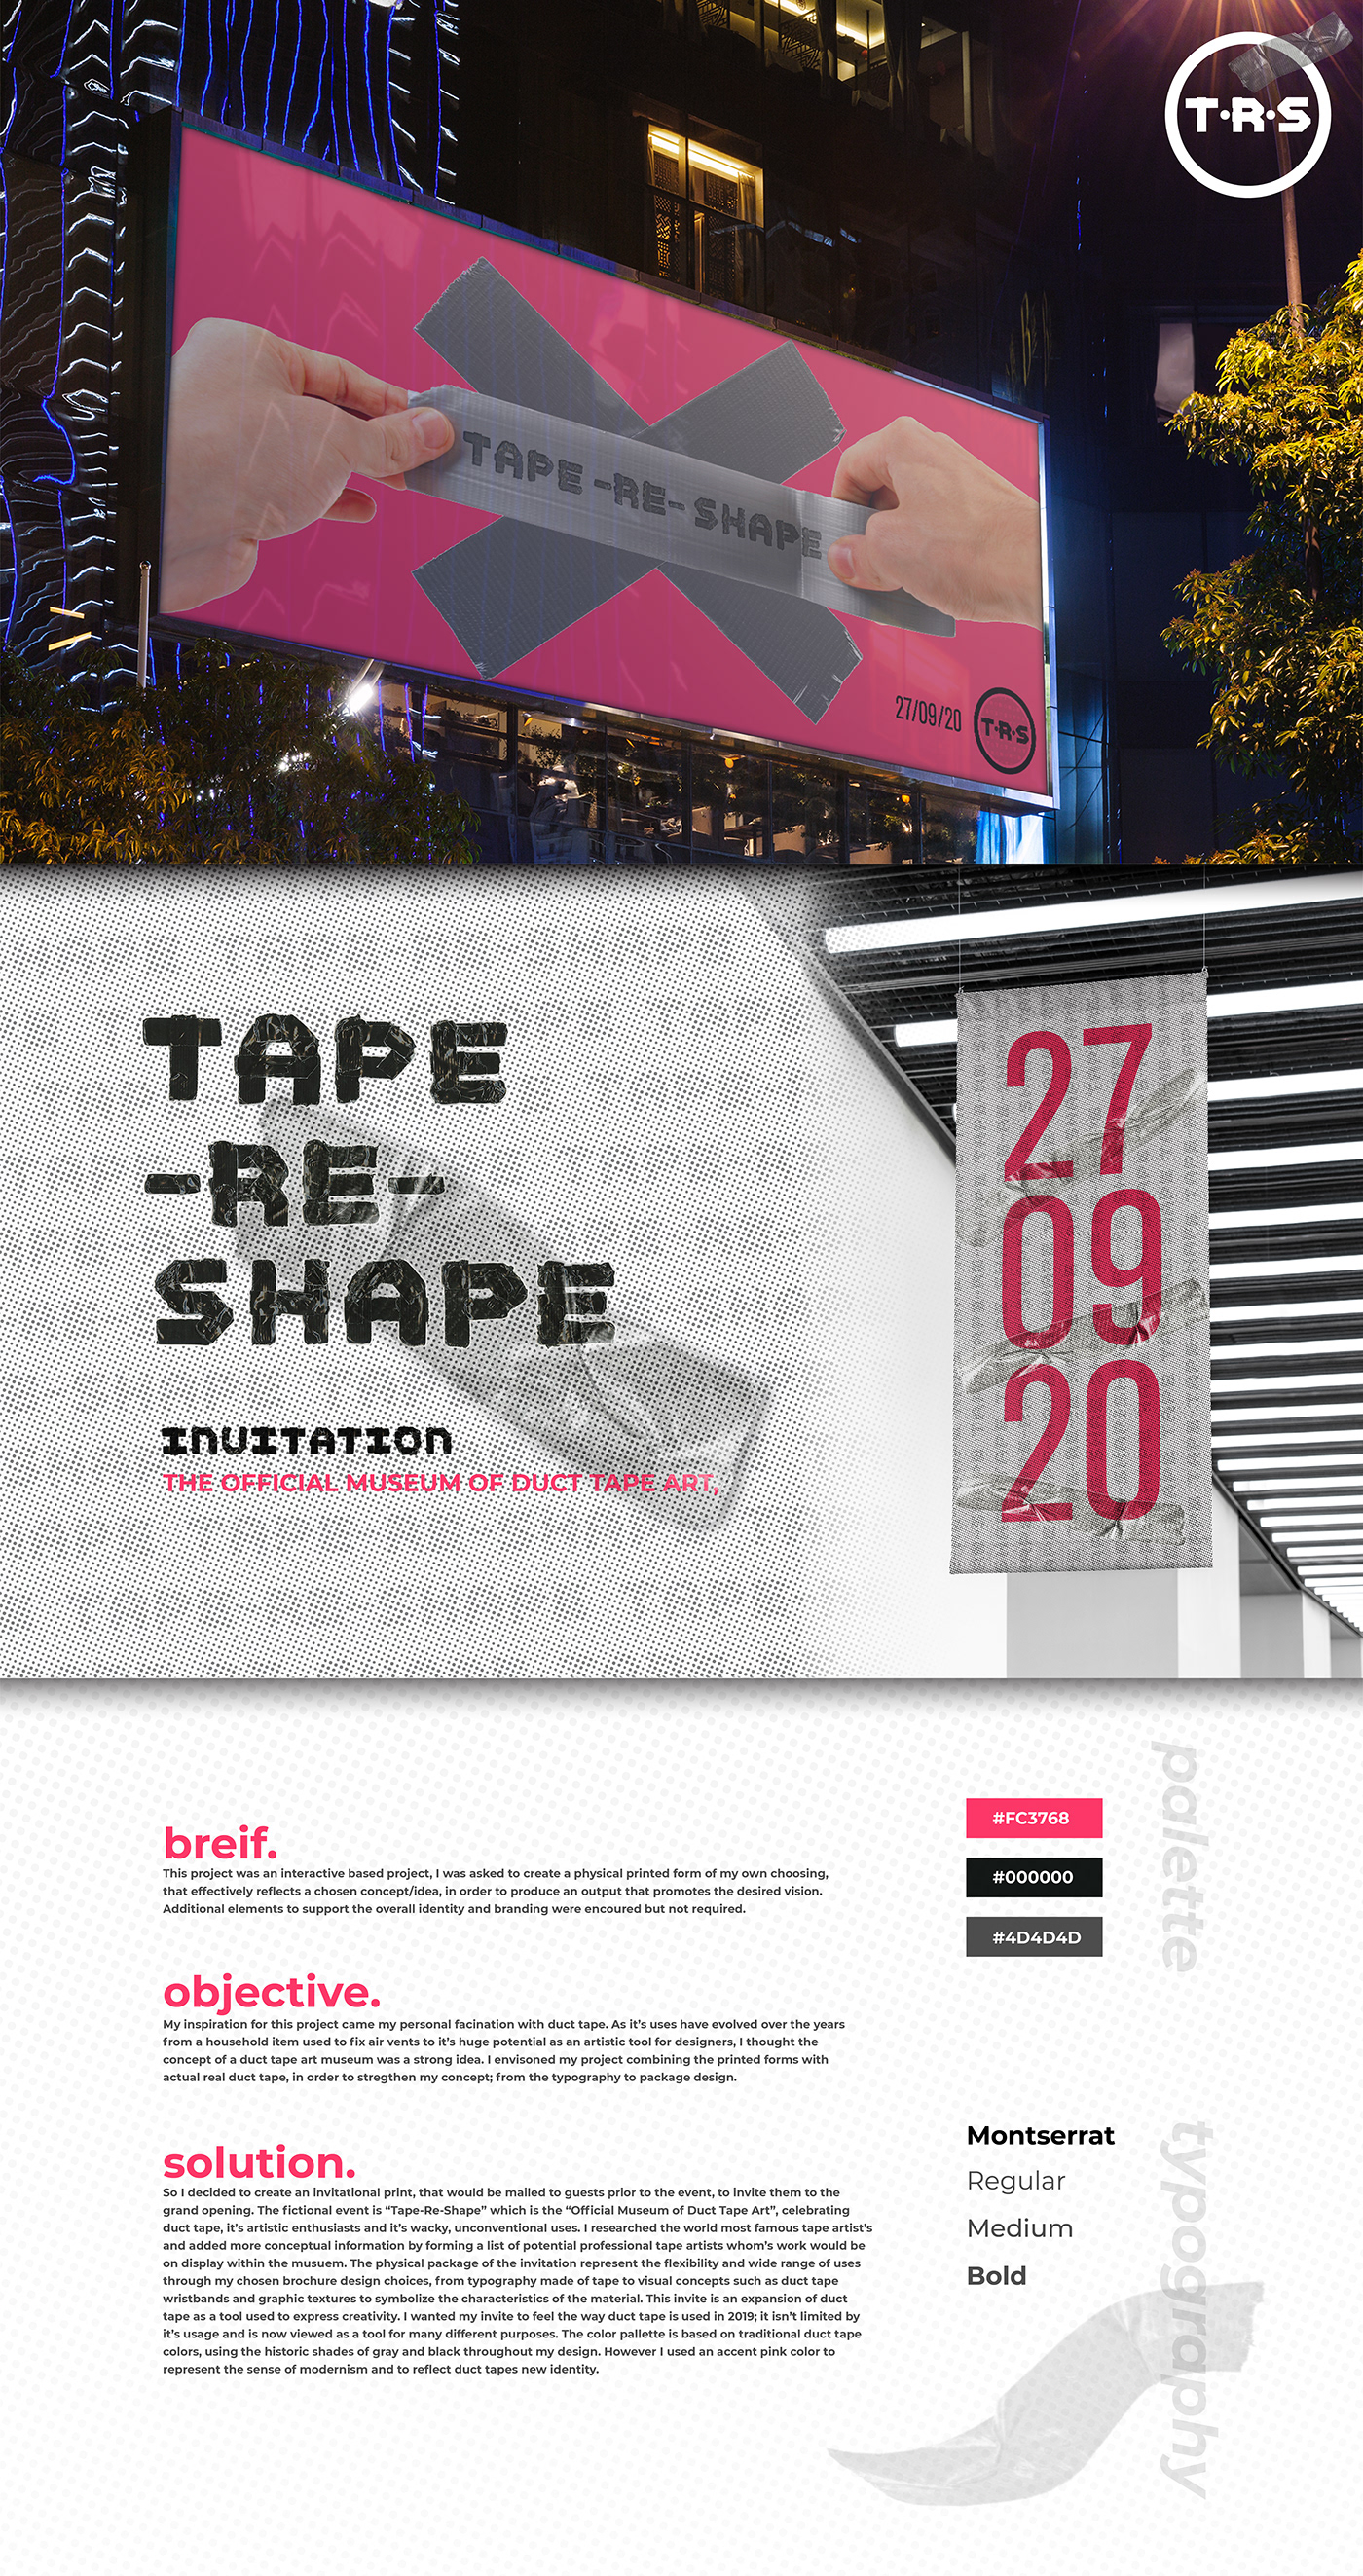 Event branding  interaction graphicdesign identity type adobeawards Packaging interactiondesign ducttape